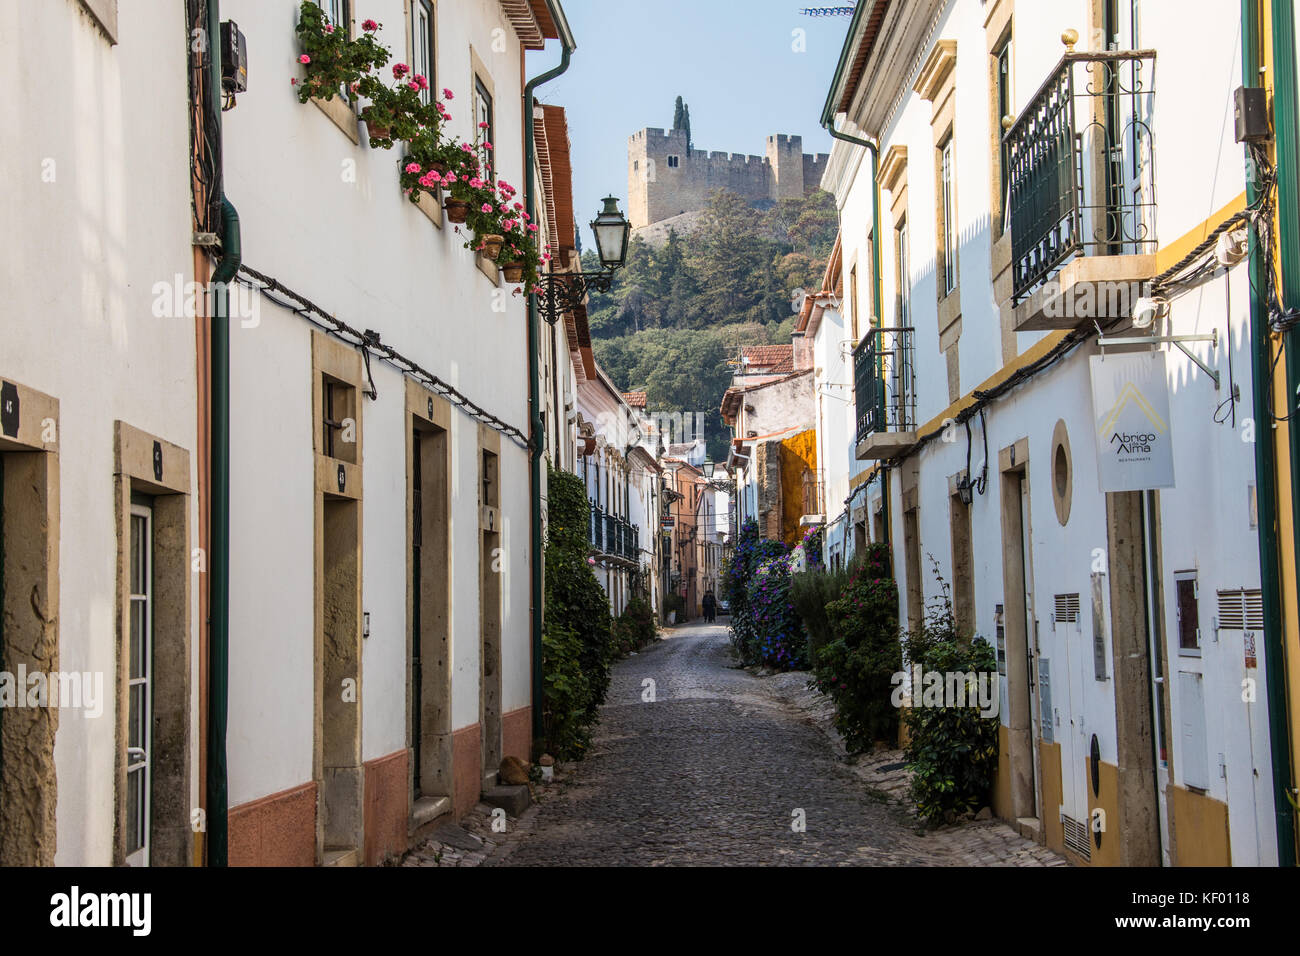 Narrow street in old town beneath the Convent of Christ, Tomar, Ribatejo Province, Portugal Stock Photo